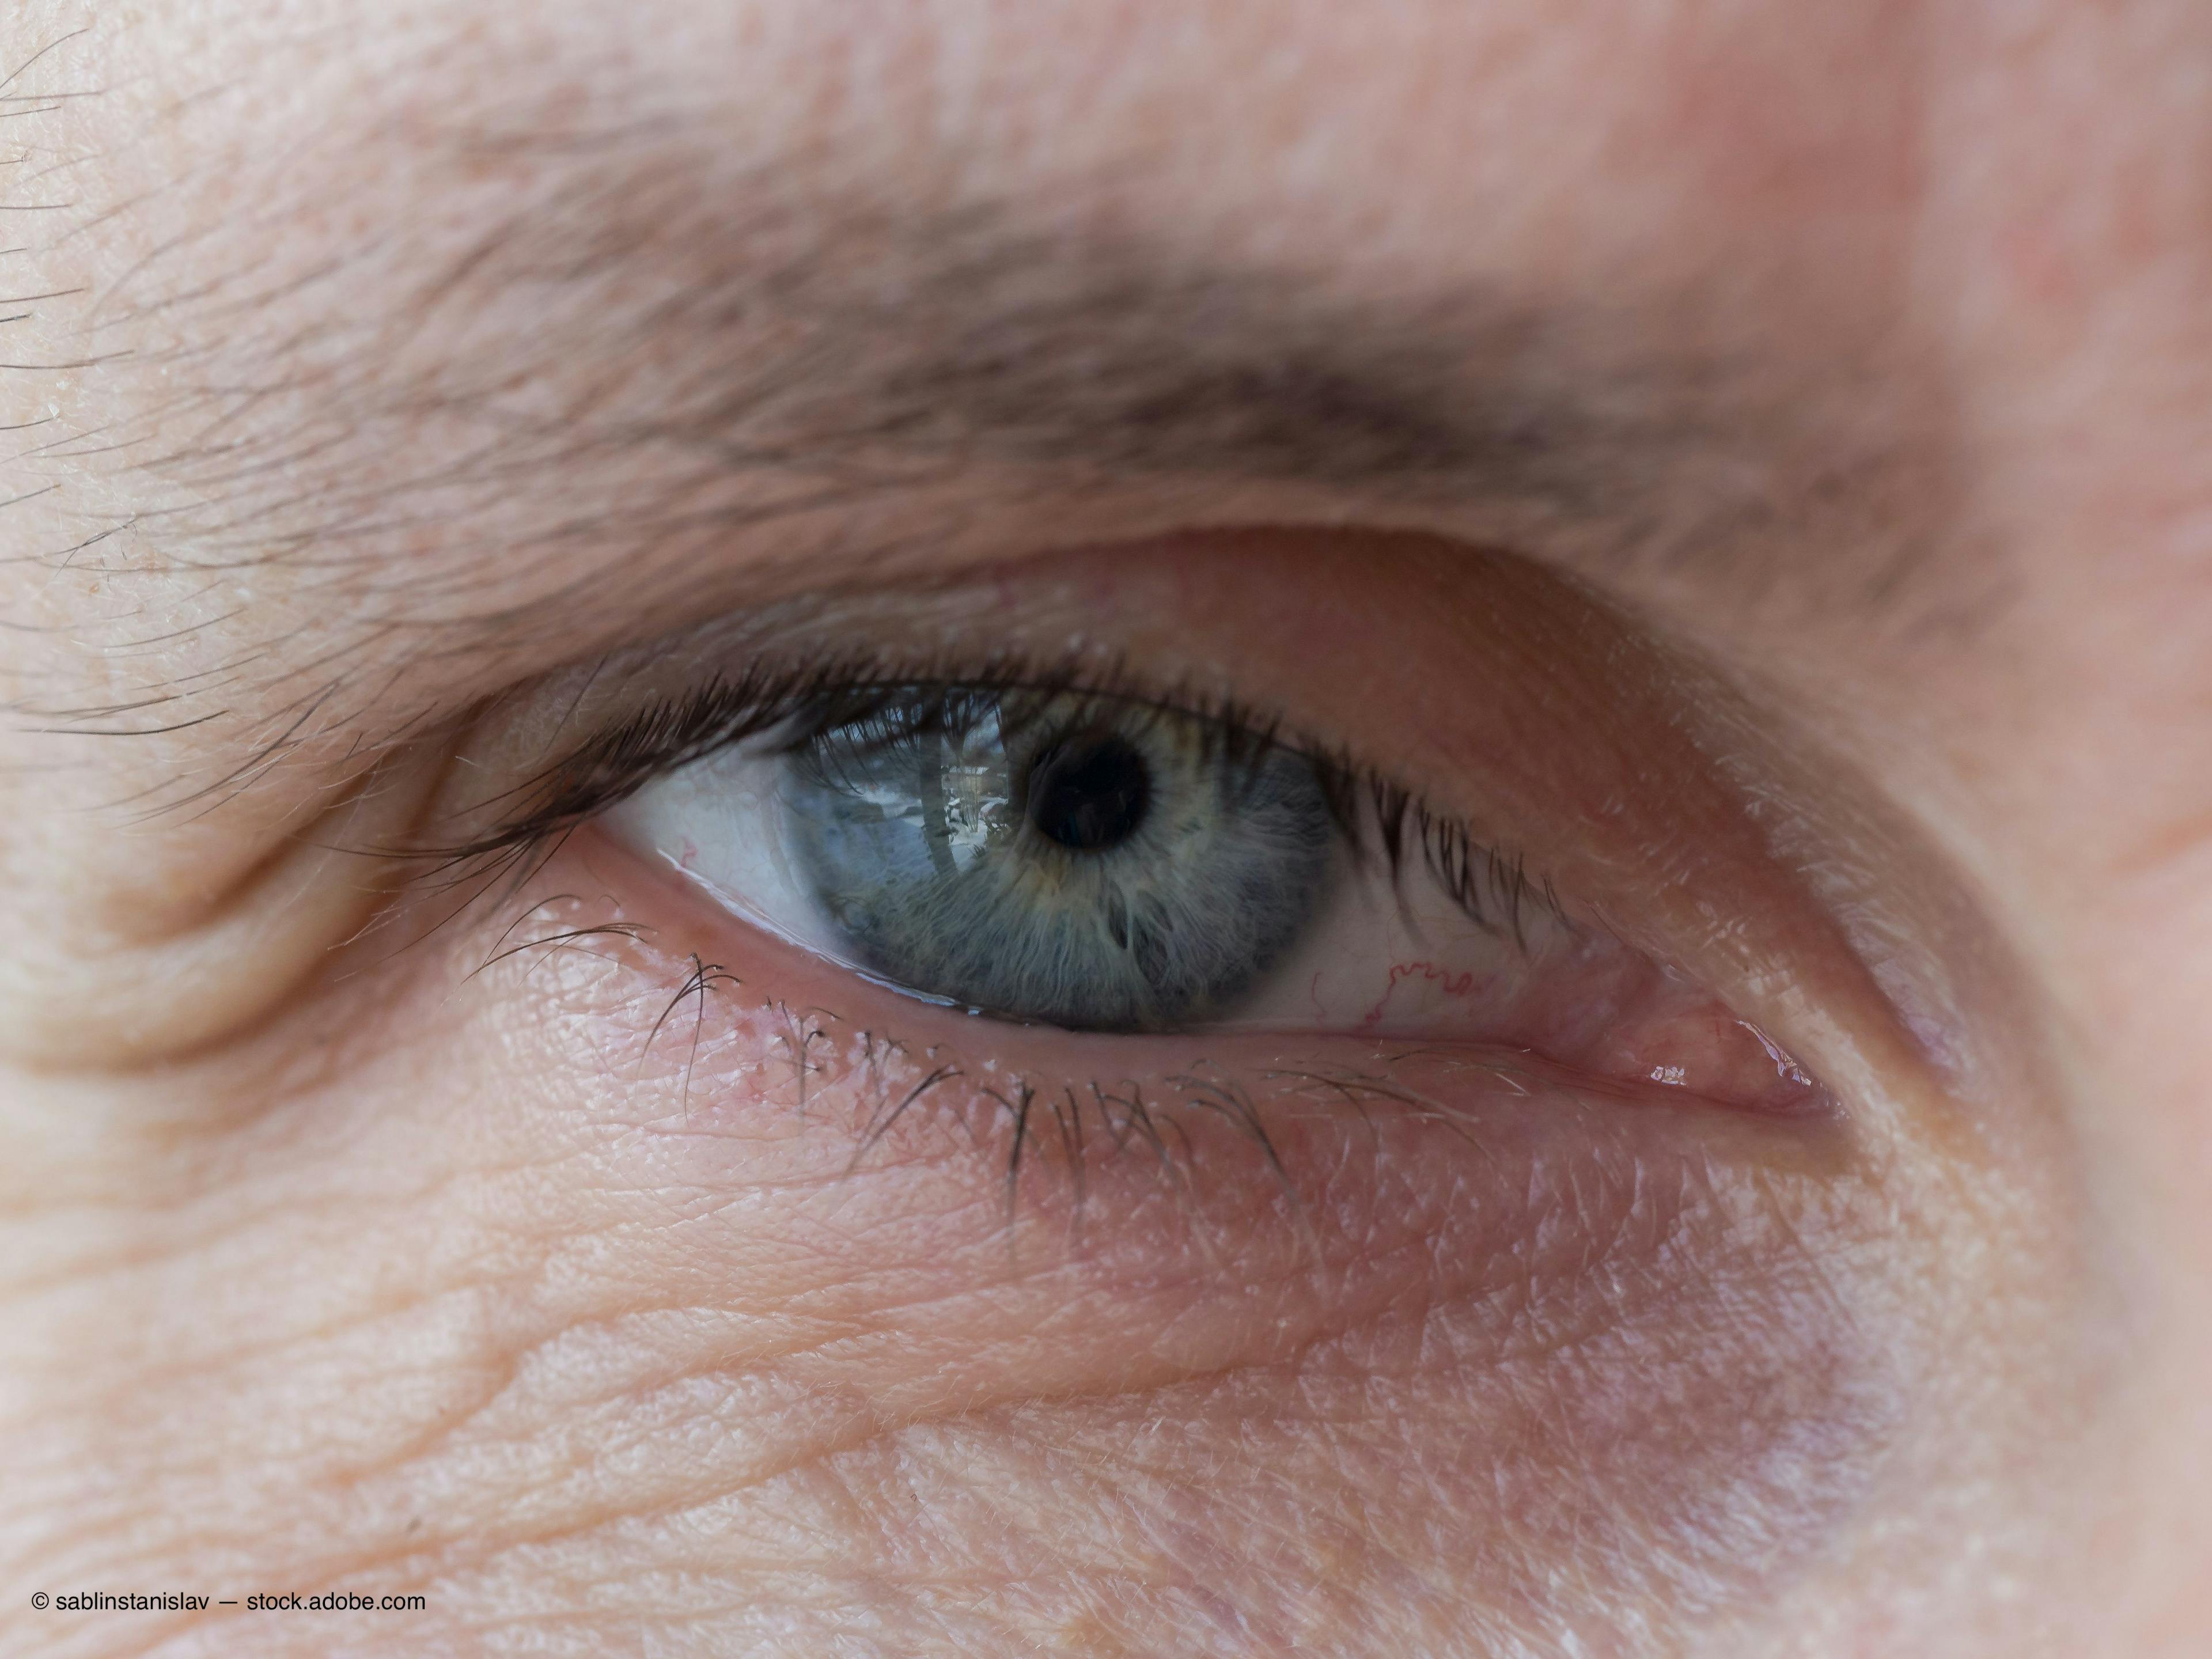 Improve Patient Comfort With Intravitreal Injections